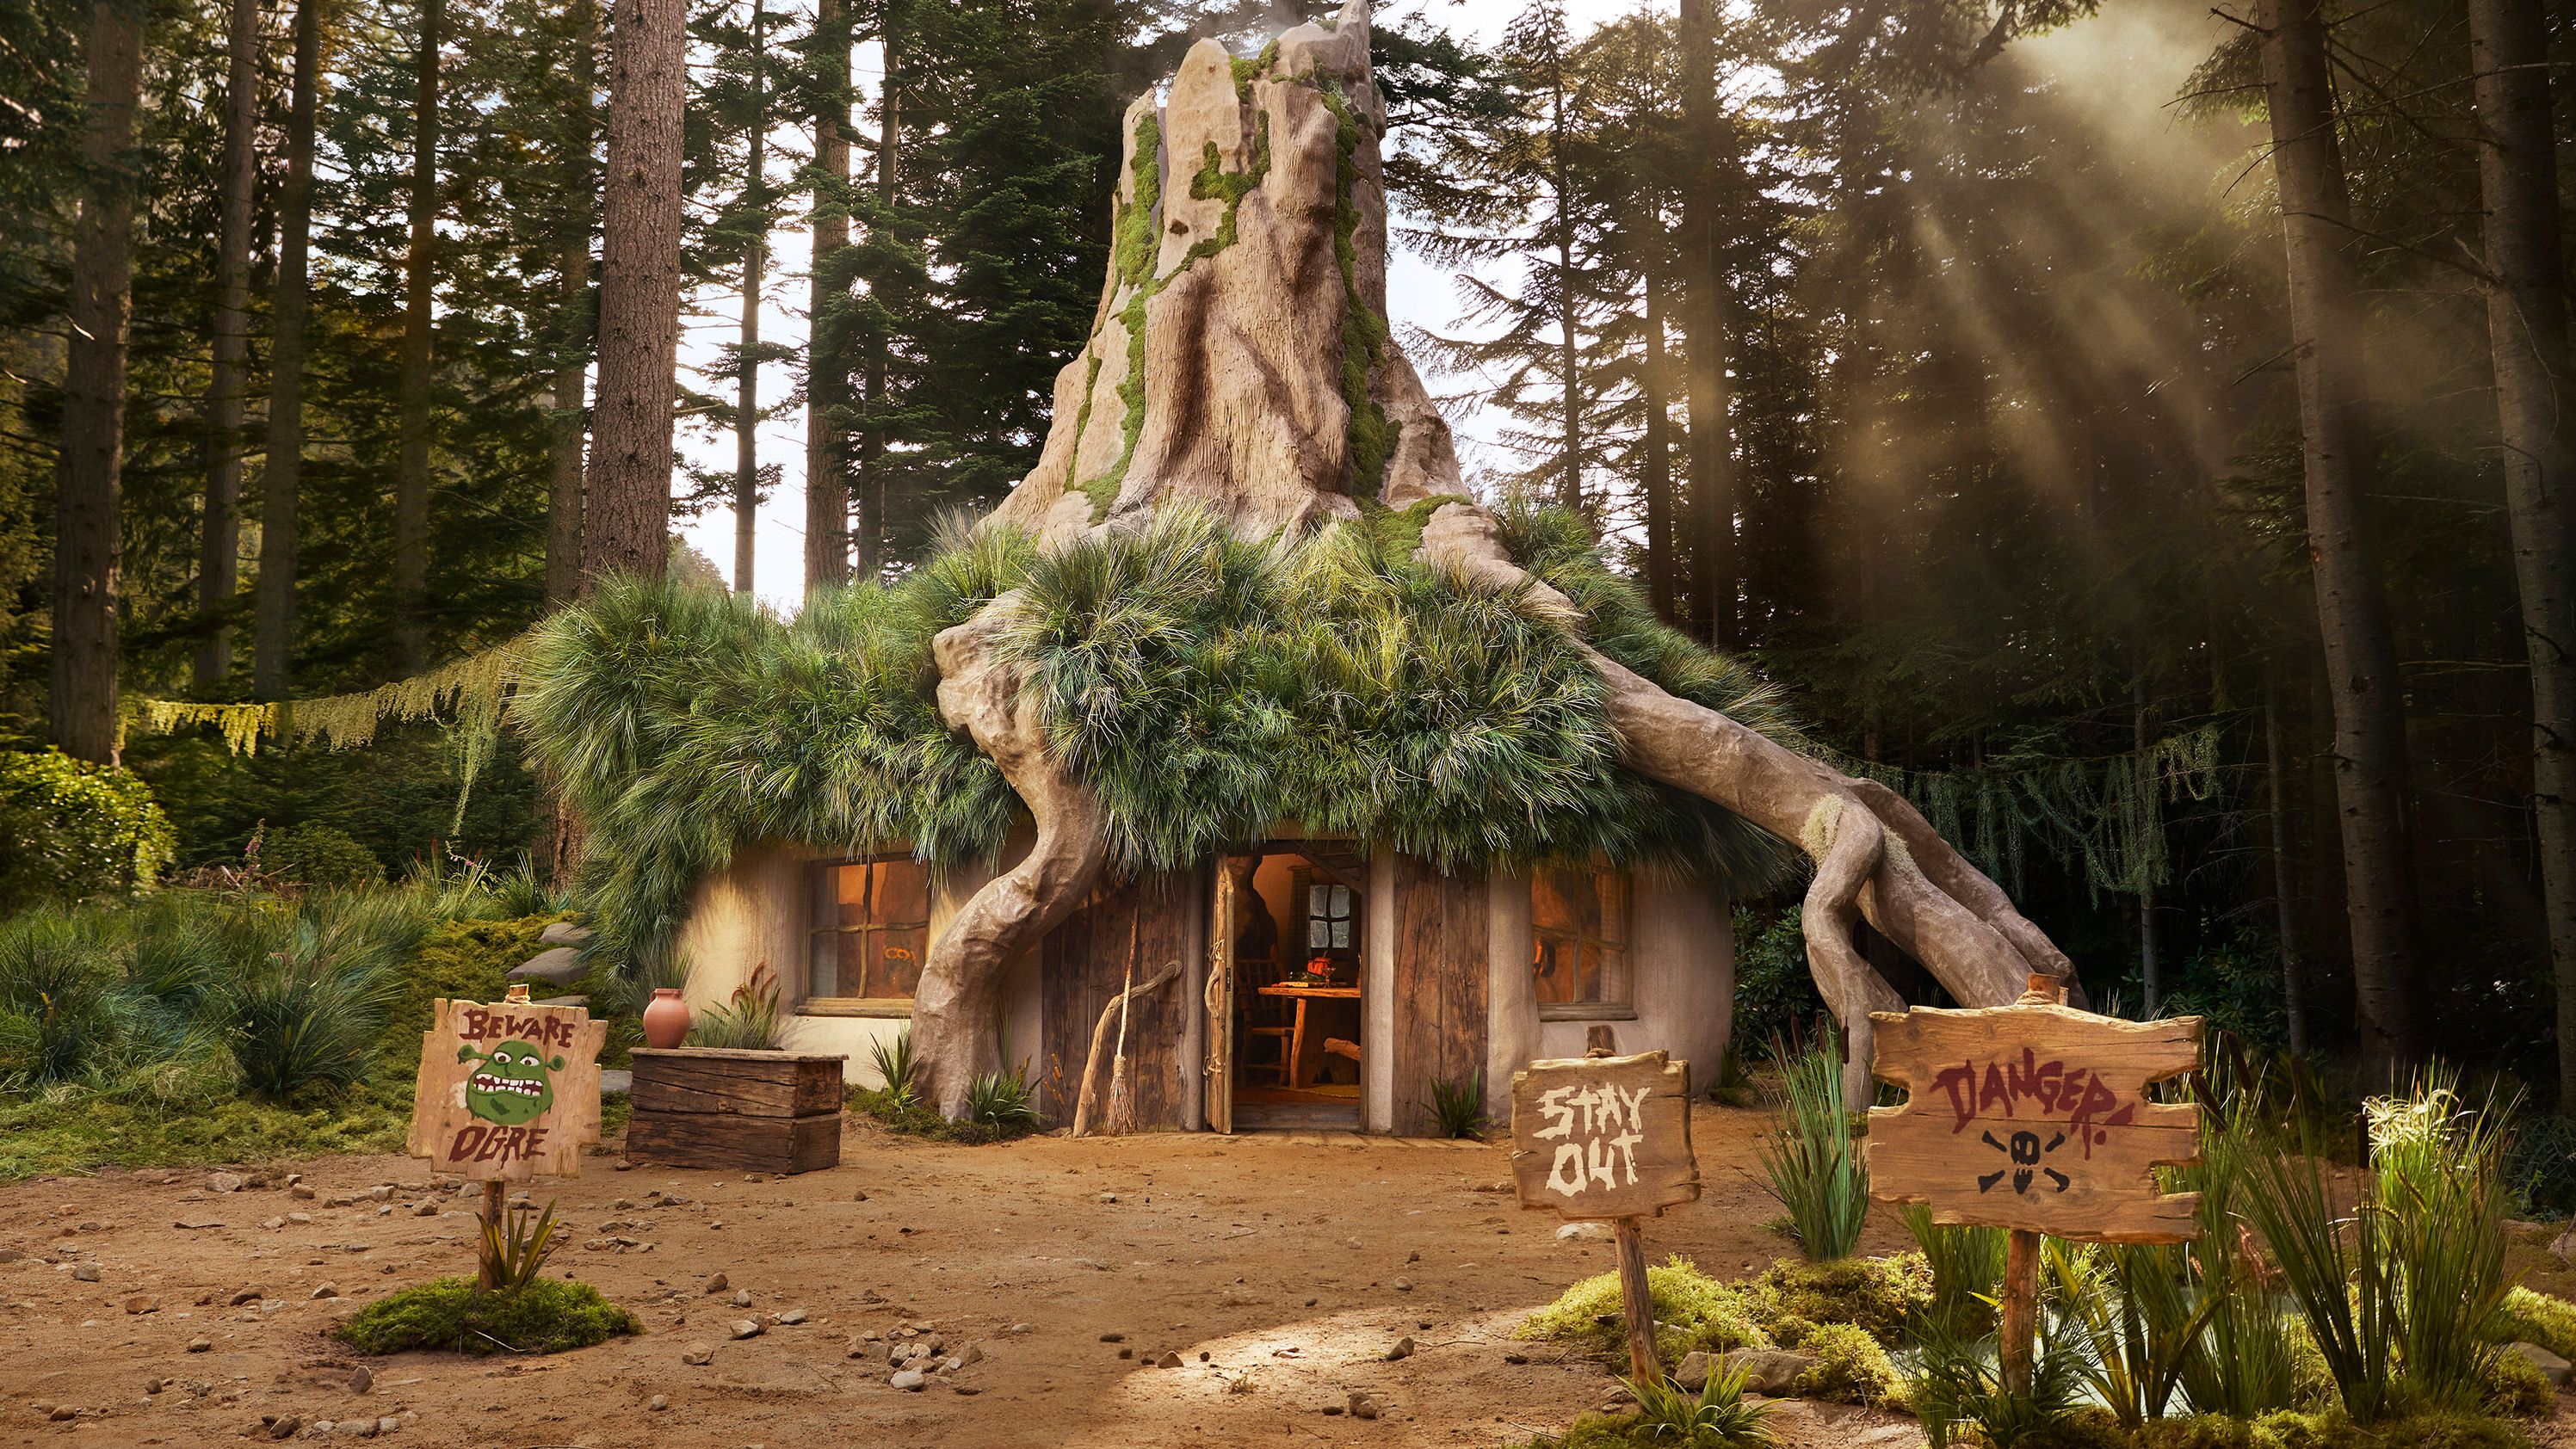 Shrek's 'swamp' is now available to rent on Airbnb